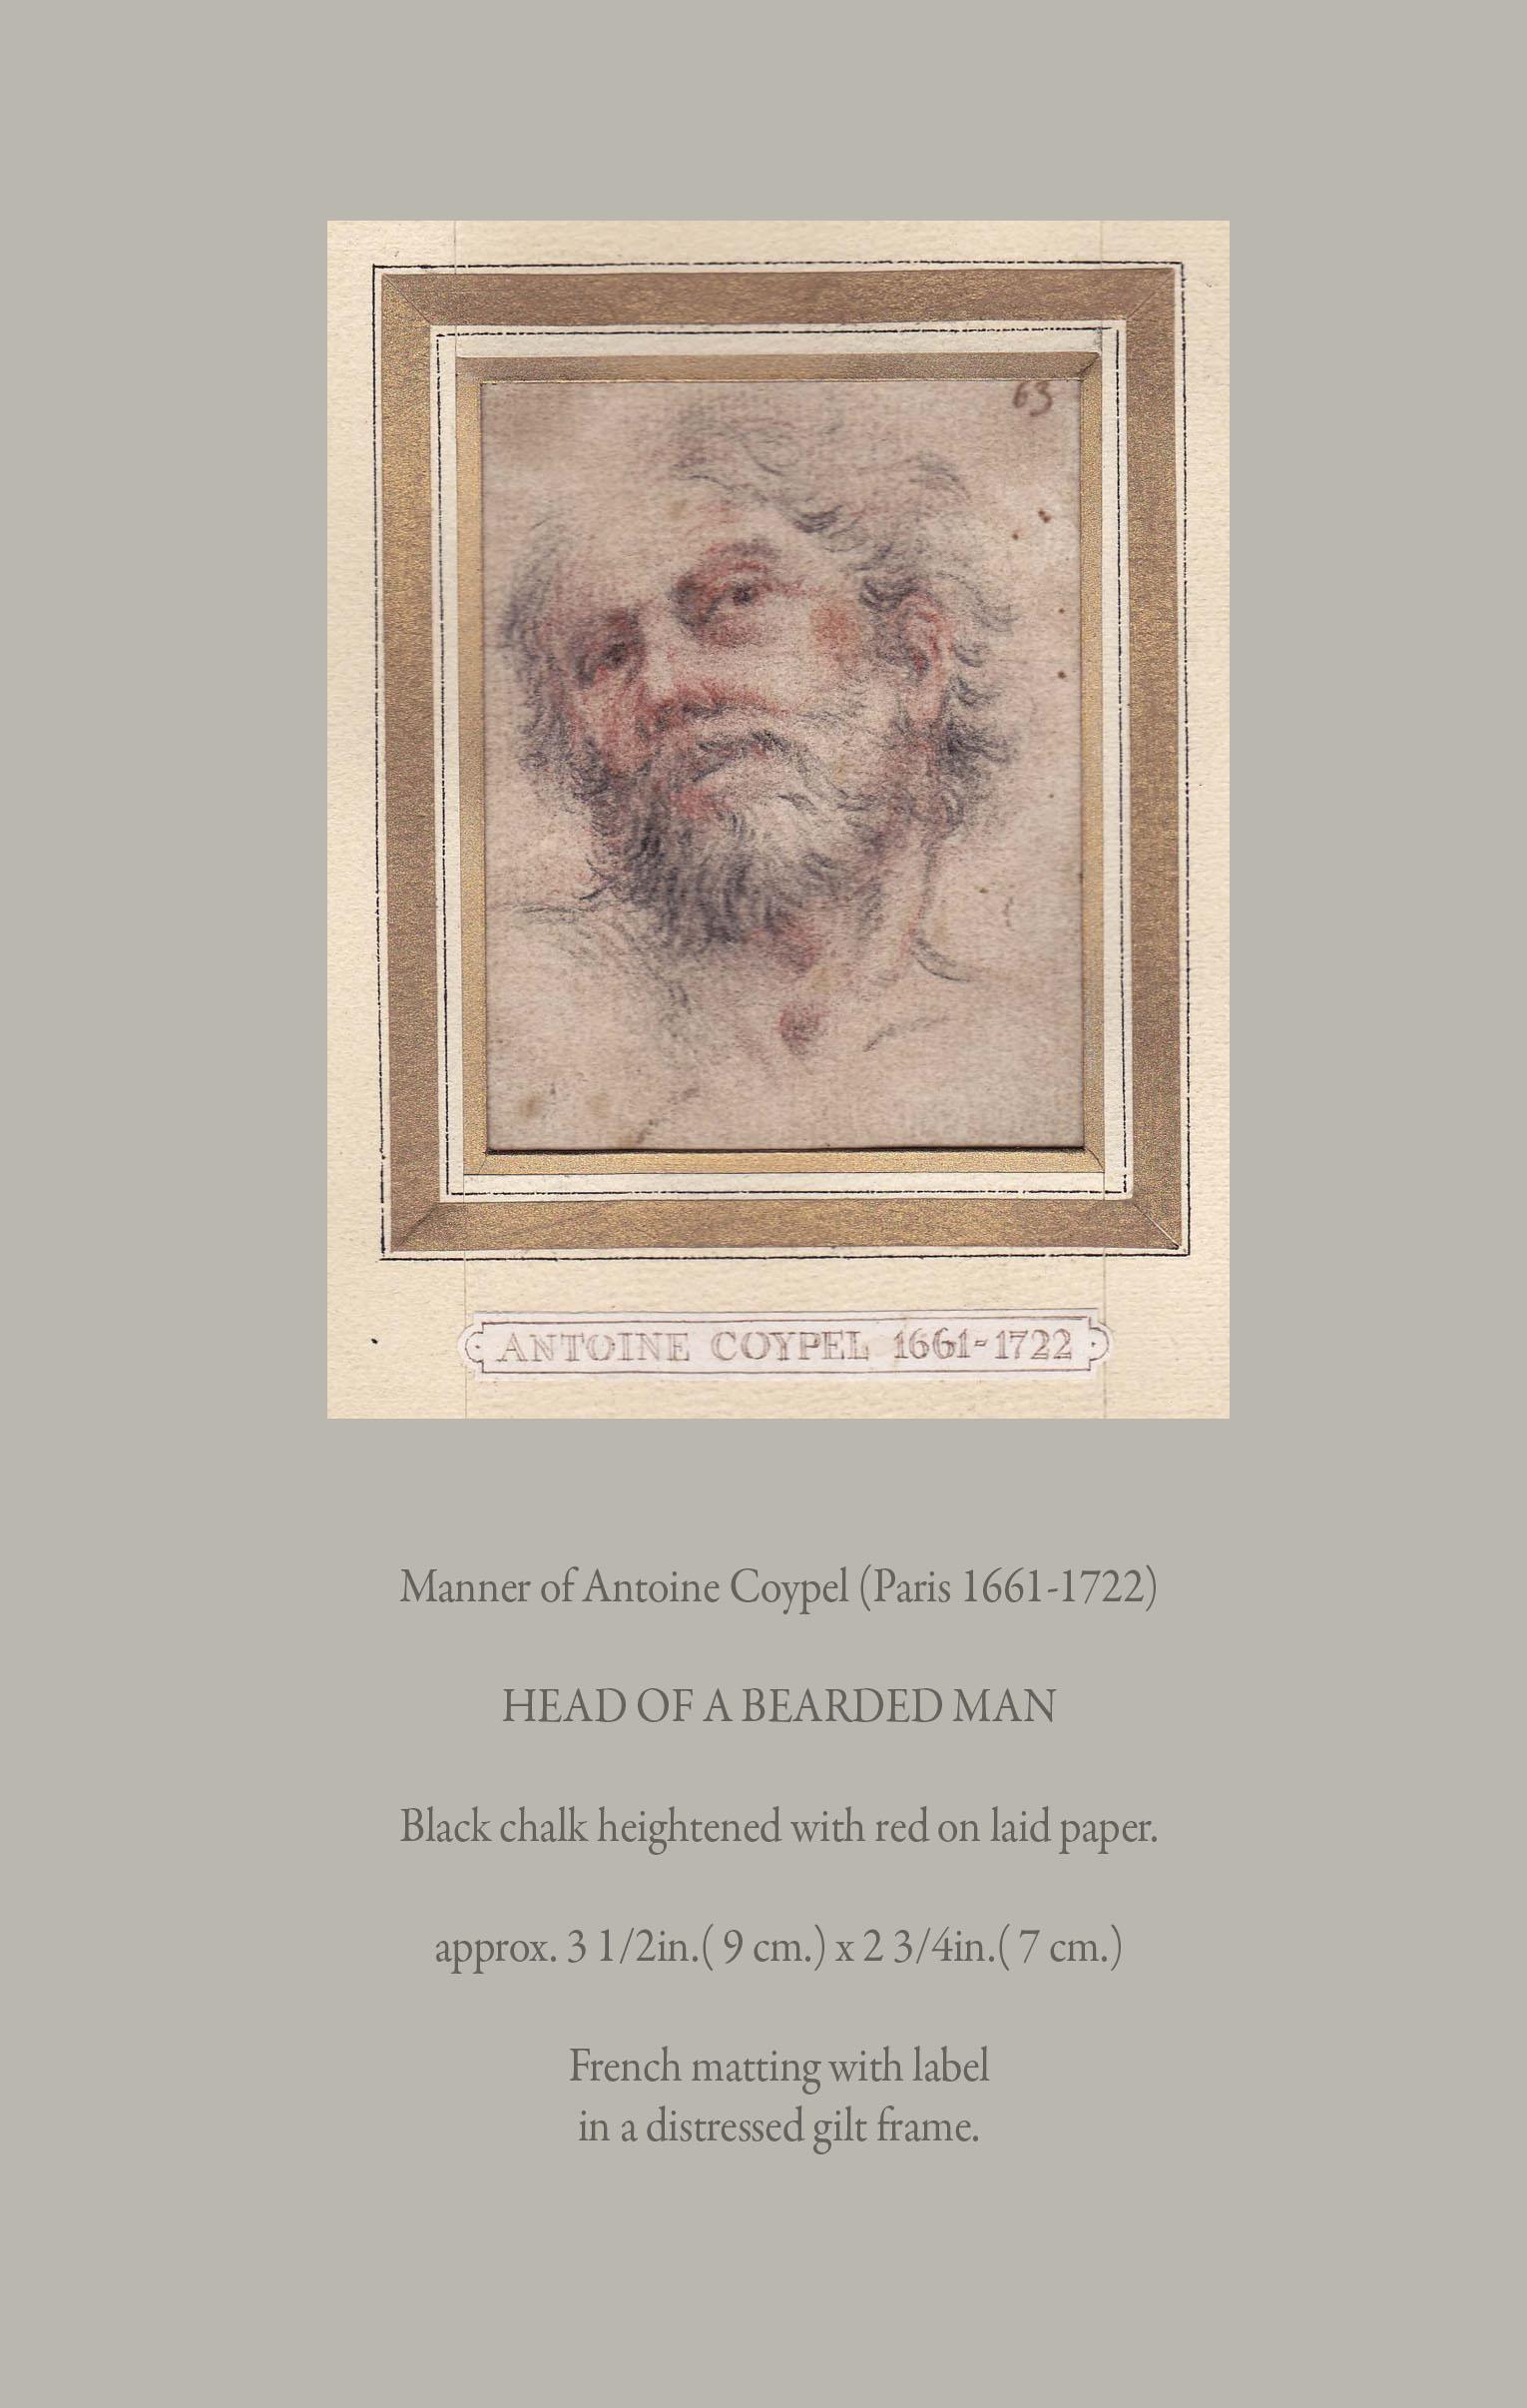 Paper Old Master Drawing in the Manner of Antoine Coypel